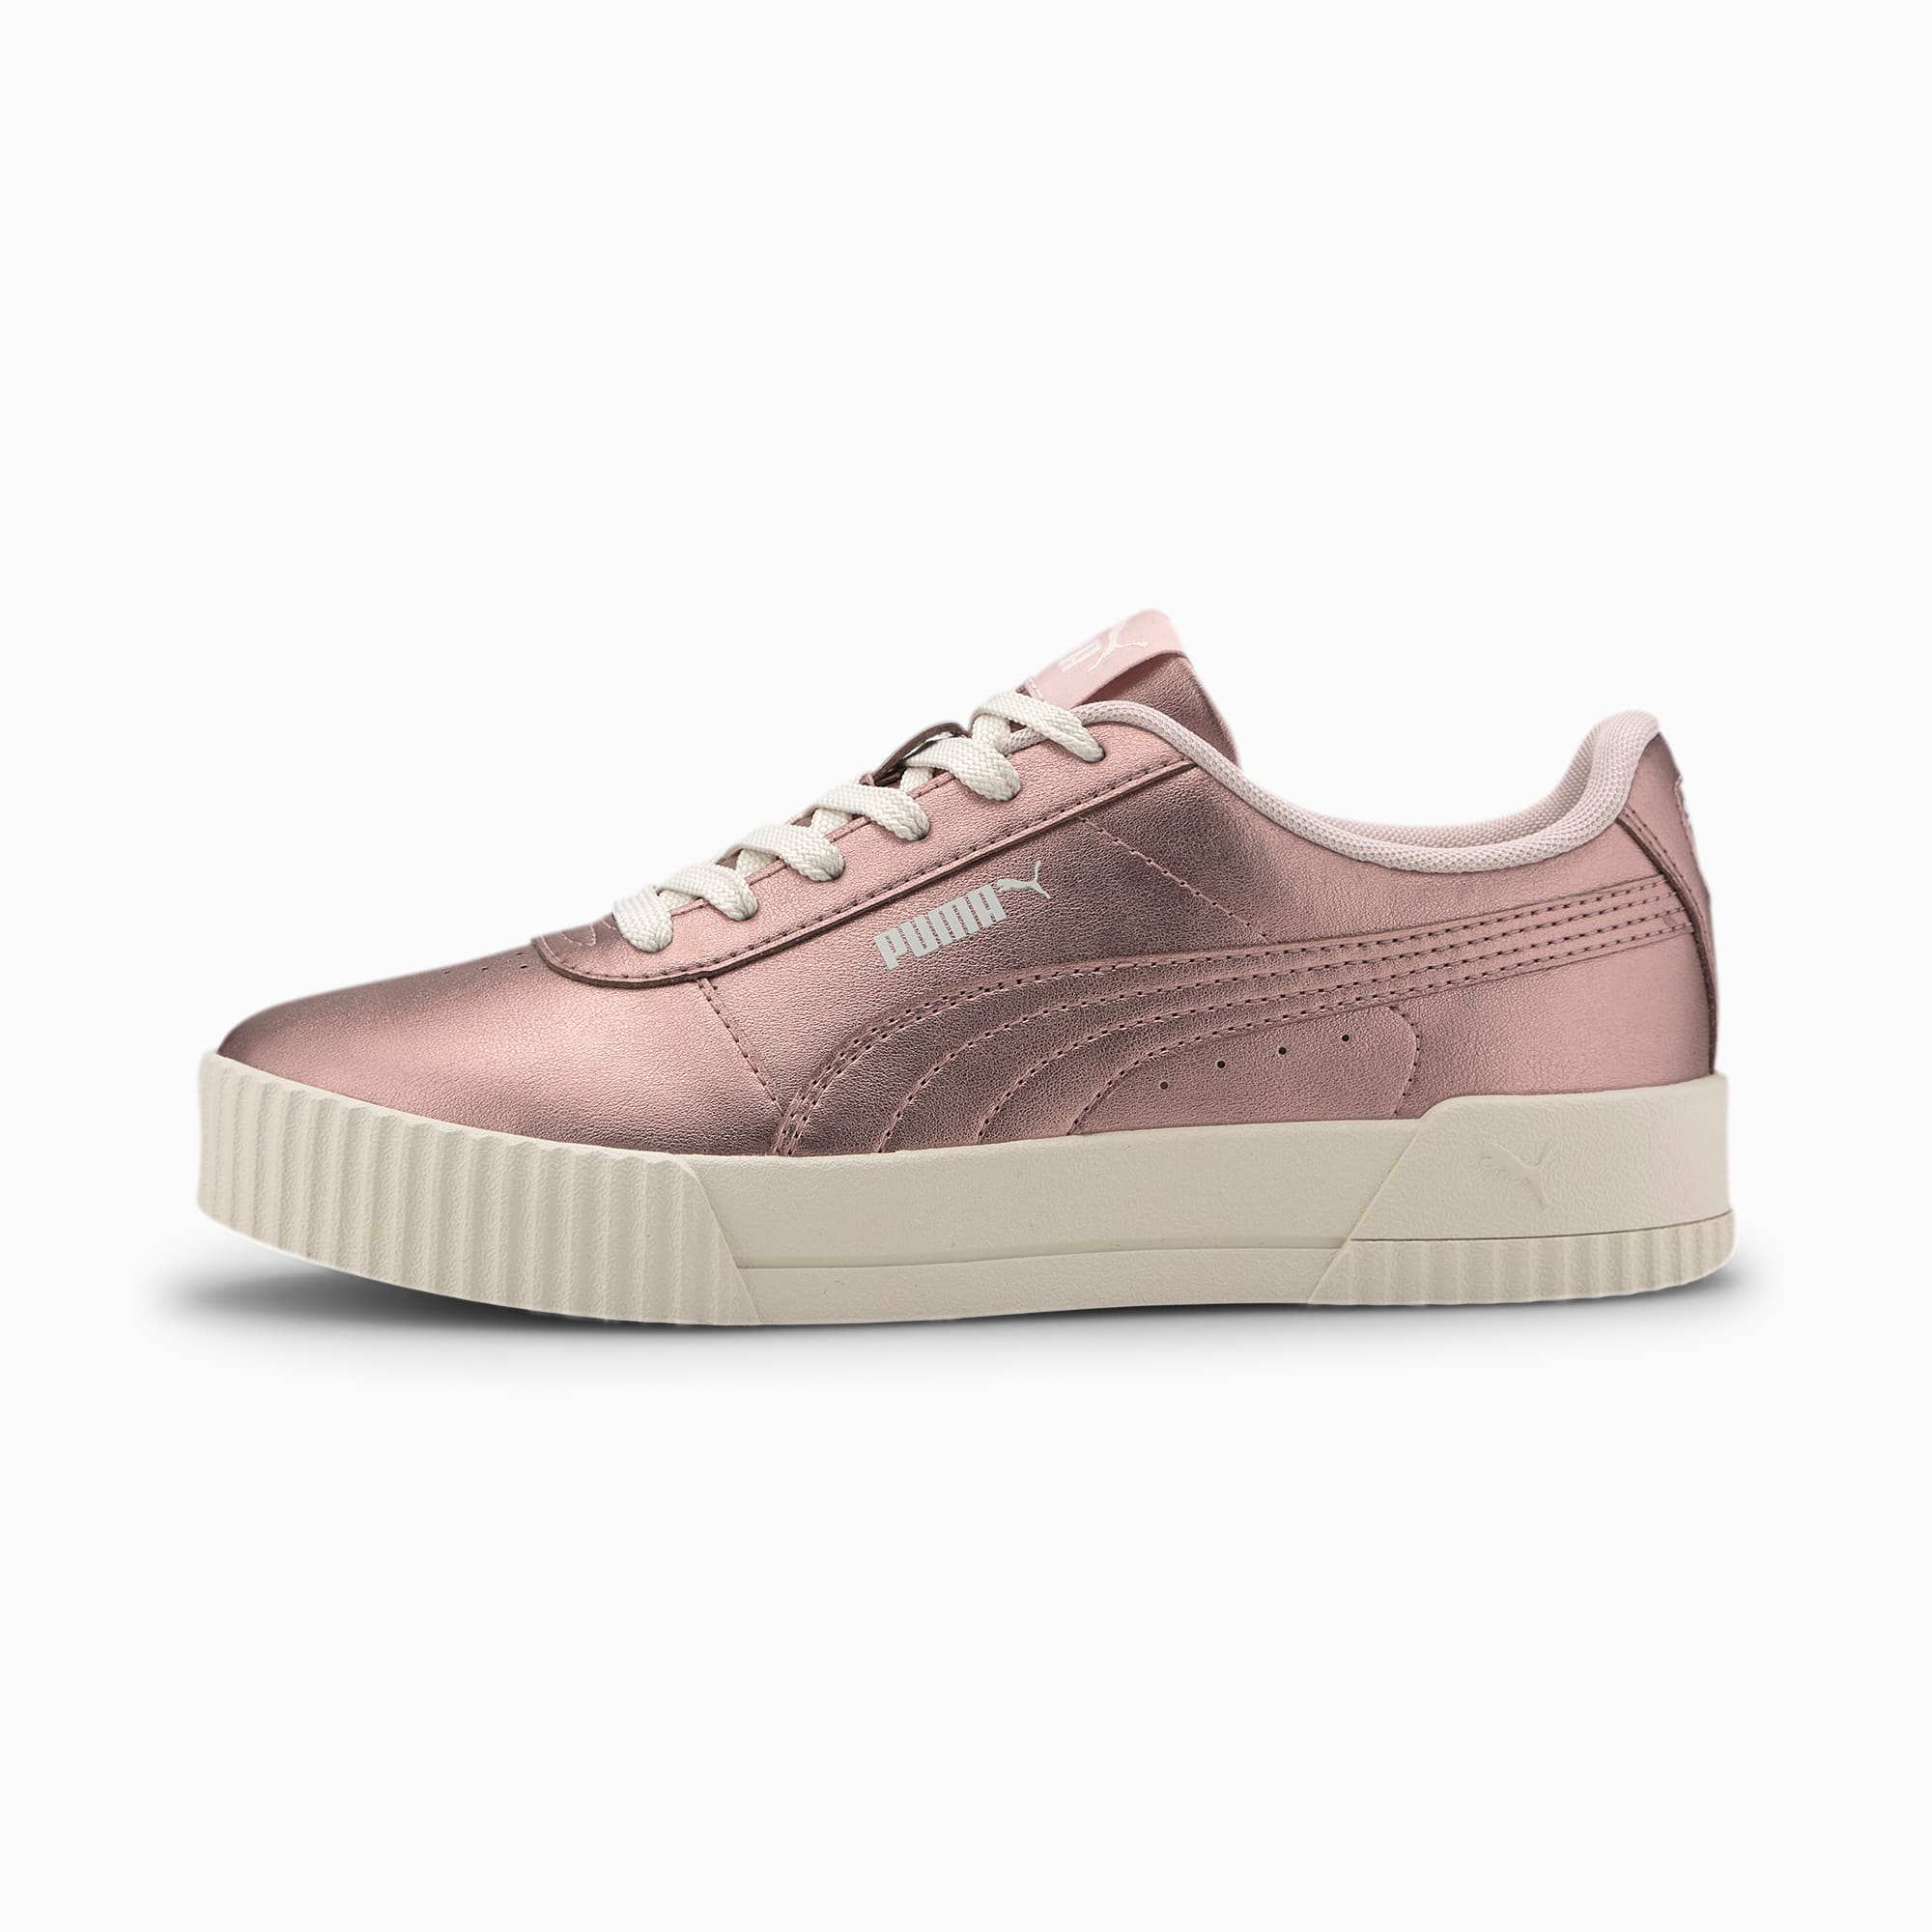 puma shoes with rose gold